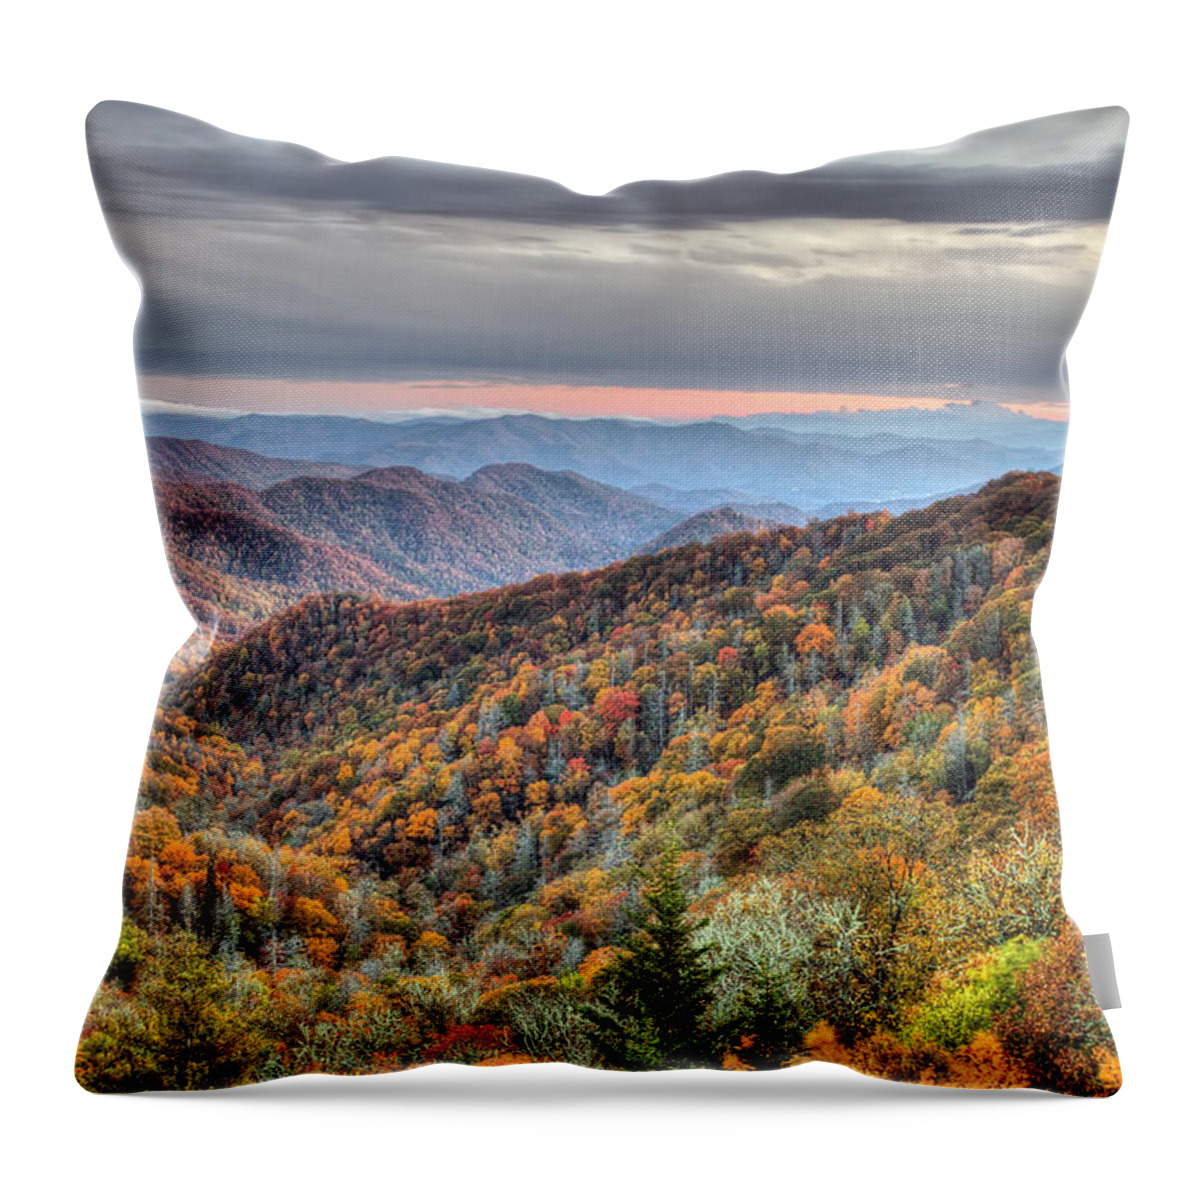 Blue Ridge Parkway Throw Pillow featuring the photograph Autumn colors on the Blue Ridge Parkway at sunset by Pierre Leclerc Photography